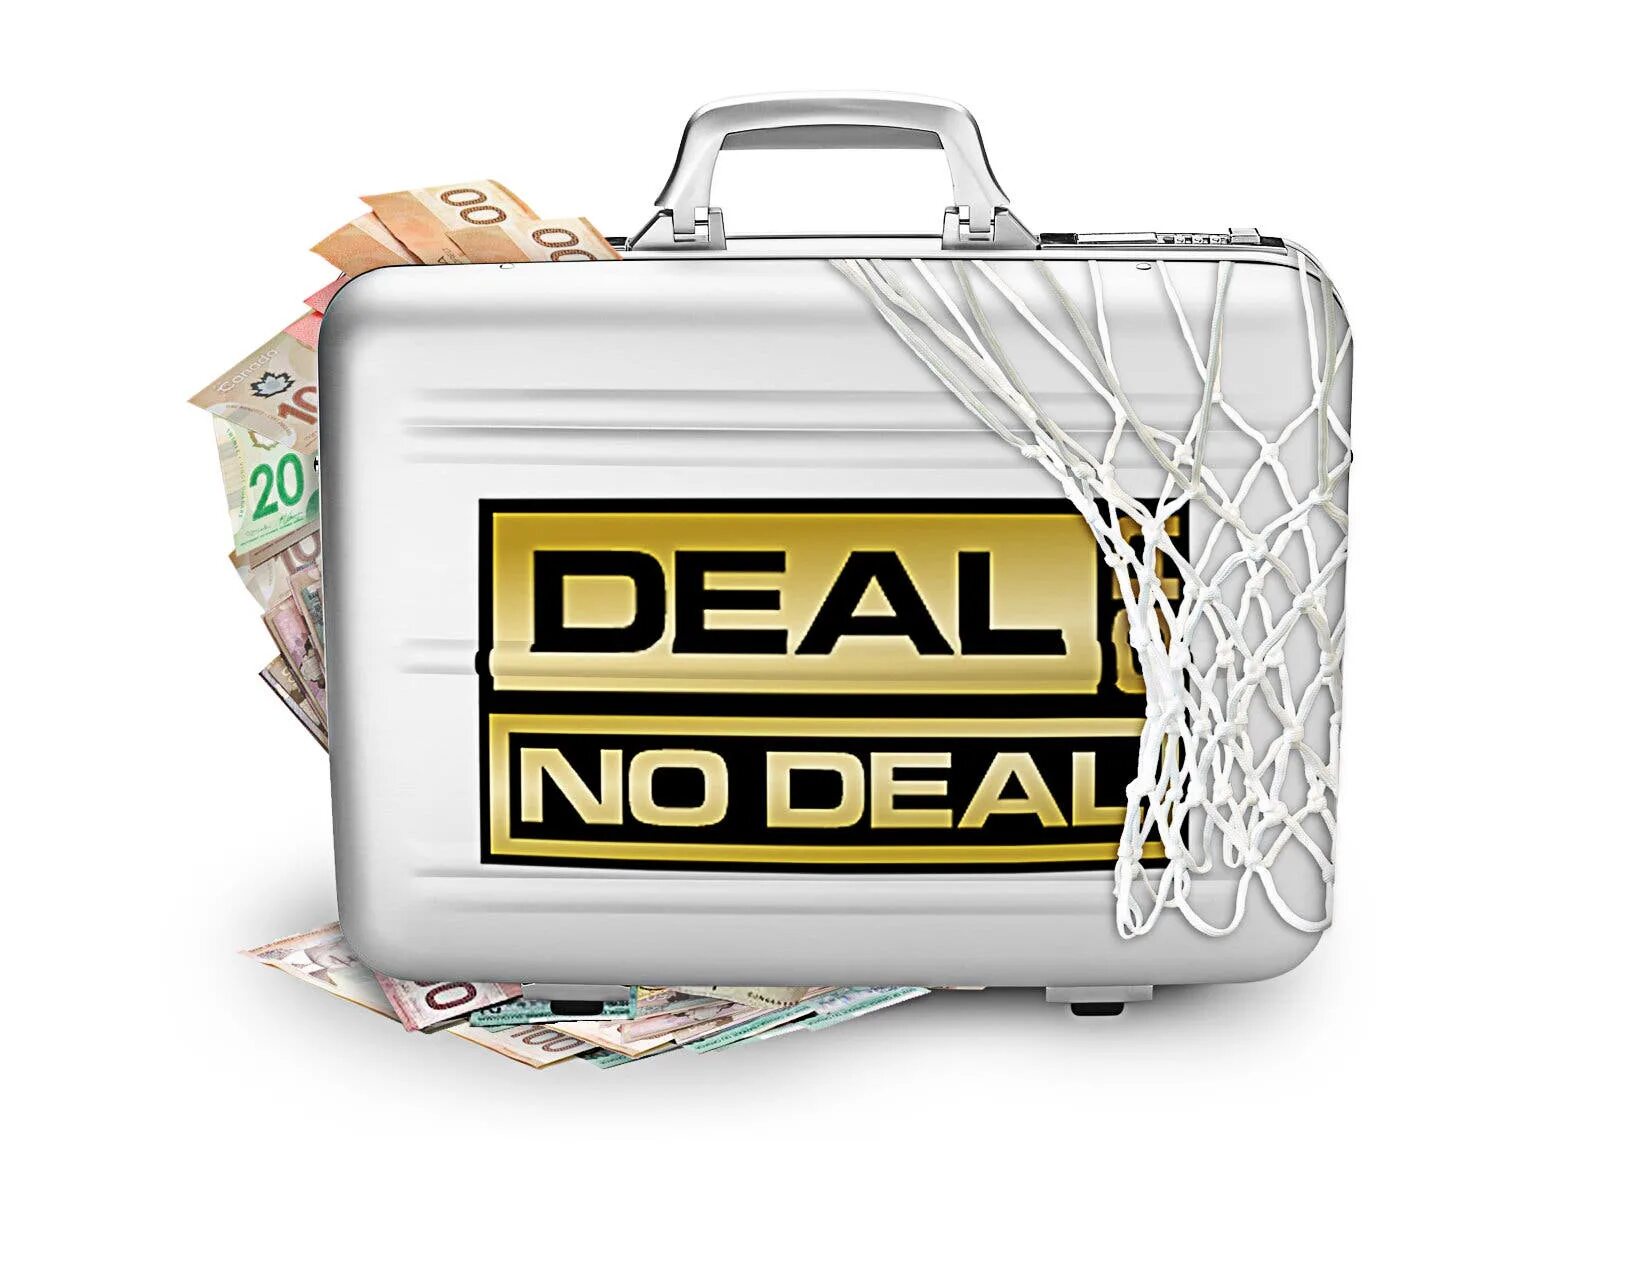 0 deal. A great deal of. Слово deal. Deal картинки. Deal or not deal.